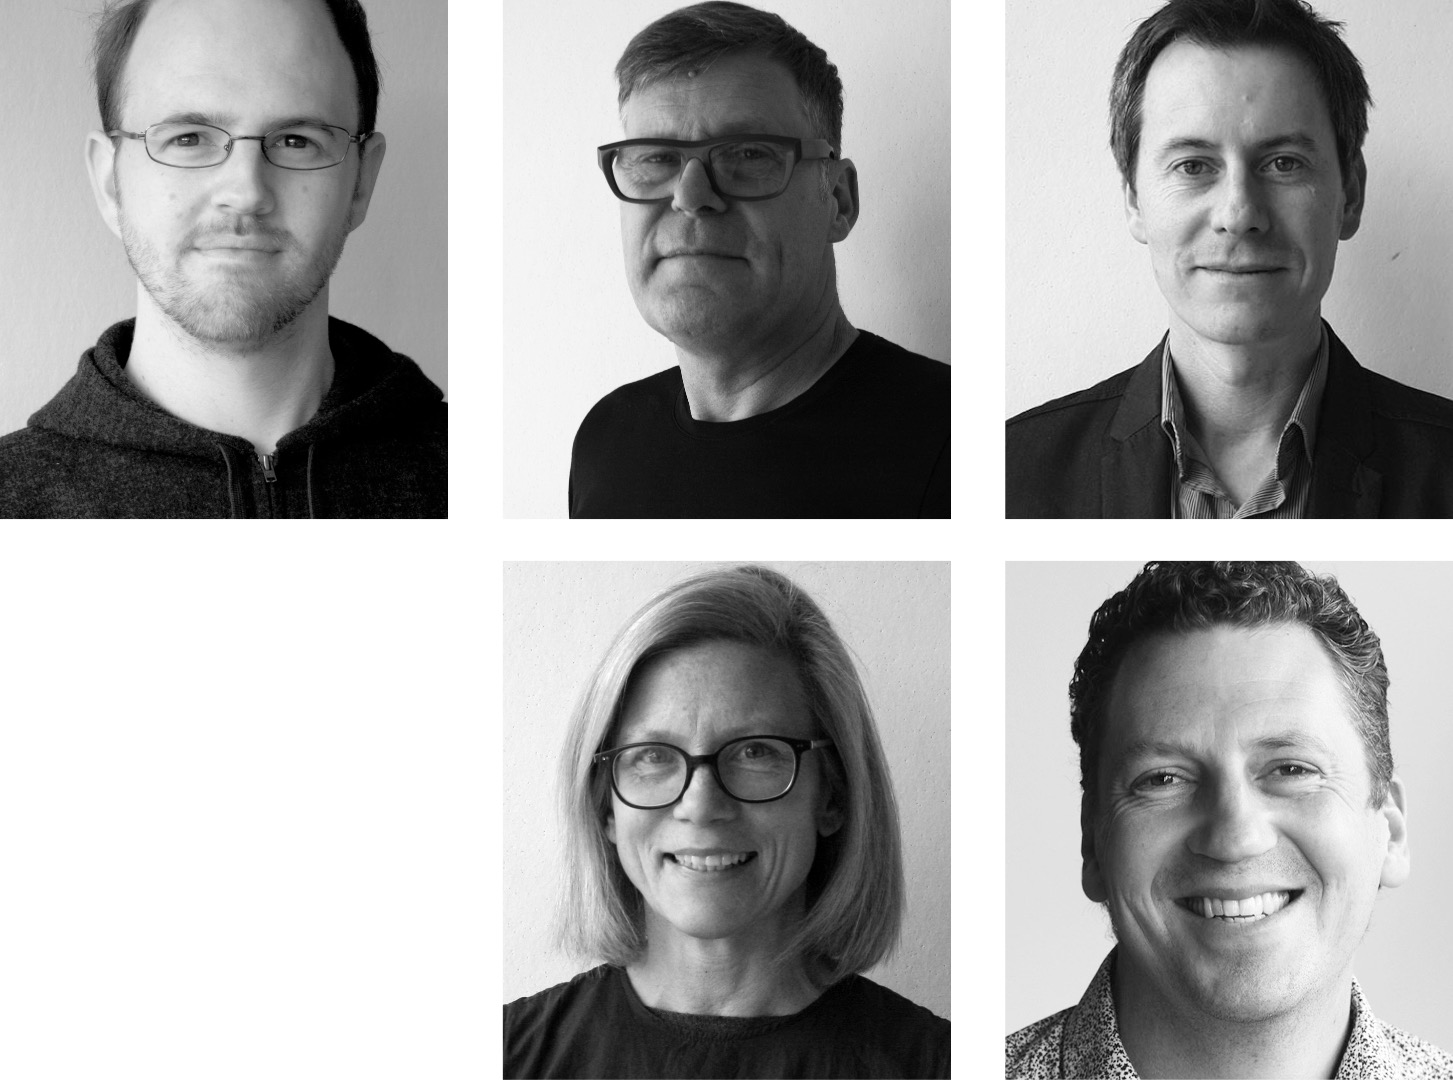 Bret Thurston (top left), Marc Woodbury (top centre), Marcellus Lilley (top right), Juliet Barker (bottom left), and Stuart Dun (bottom right) have been appointed as Rōpū Leads at Studio Pacific.